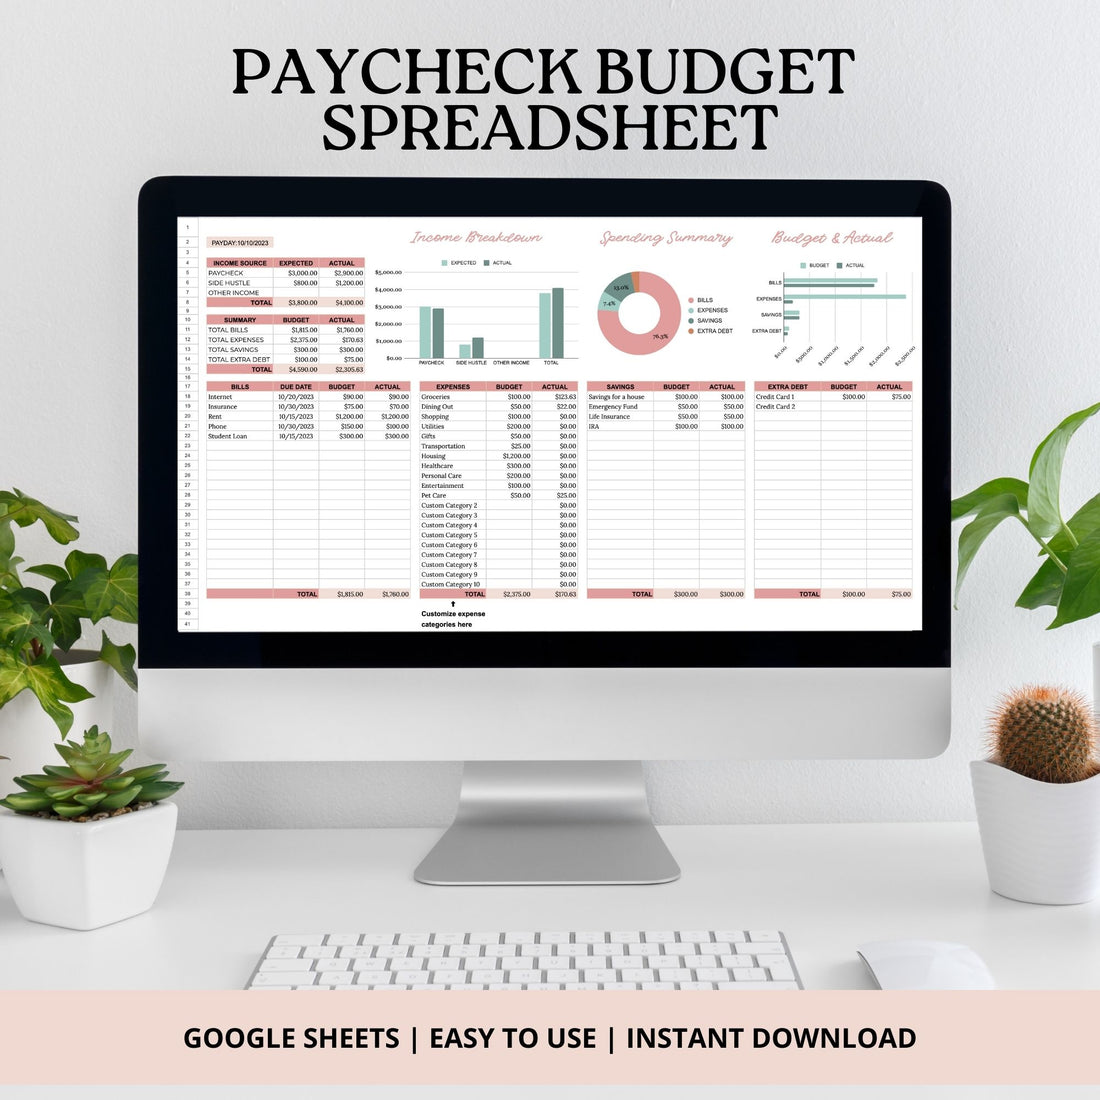 Welcome to our Budget By Paycheck Google Sheets Planner, a powerful tool designed to help you take control of your finances effortlessly. This 2-tab spreadsheet includes a comprehensive Paycheck Budget and an intuitive Expense Tracker, providing you with a holistic approach to managing your finances.